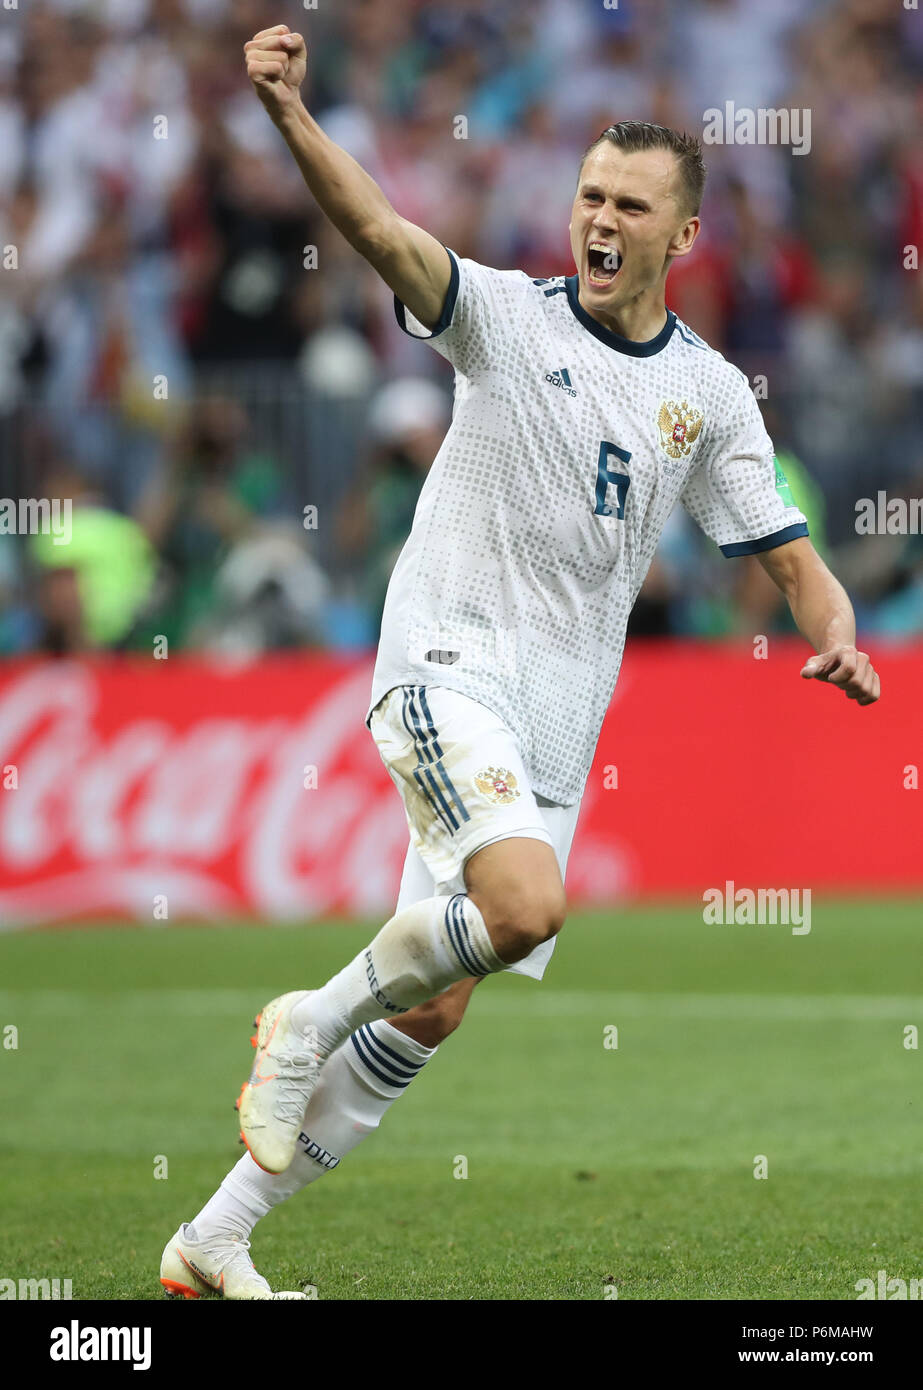 (180701) -- MOSCOW, July 1, 2018 (Xinhua) -- Denis Cheryshev of Russia celebrates after he scored a penalty kick during the 2018 FIFA World Cup round of 16 match between Spain and Russia in Moscow, Russia, July 1, 2018. Russia won 5-4 (4-3 in penalty shootout) and advanced to the quarter-final. (Xinhua/Cao Can) Stock Photo